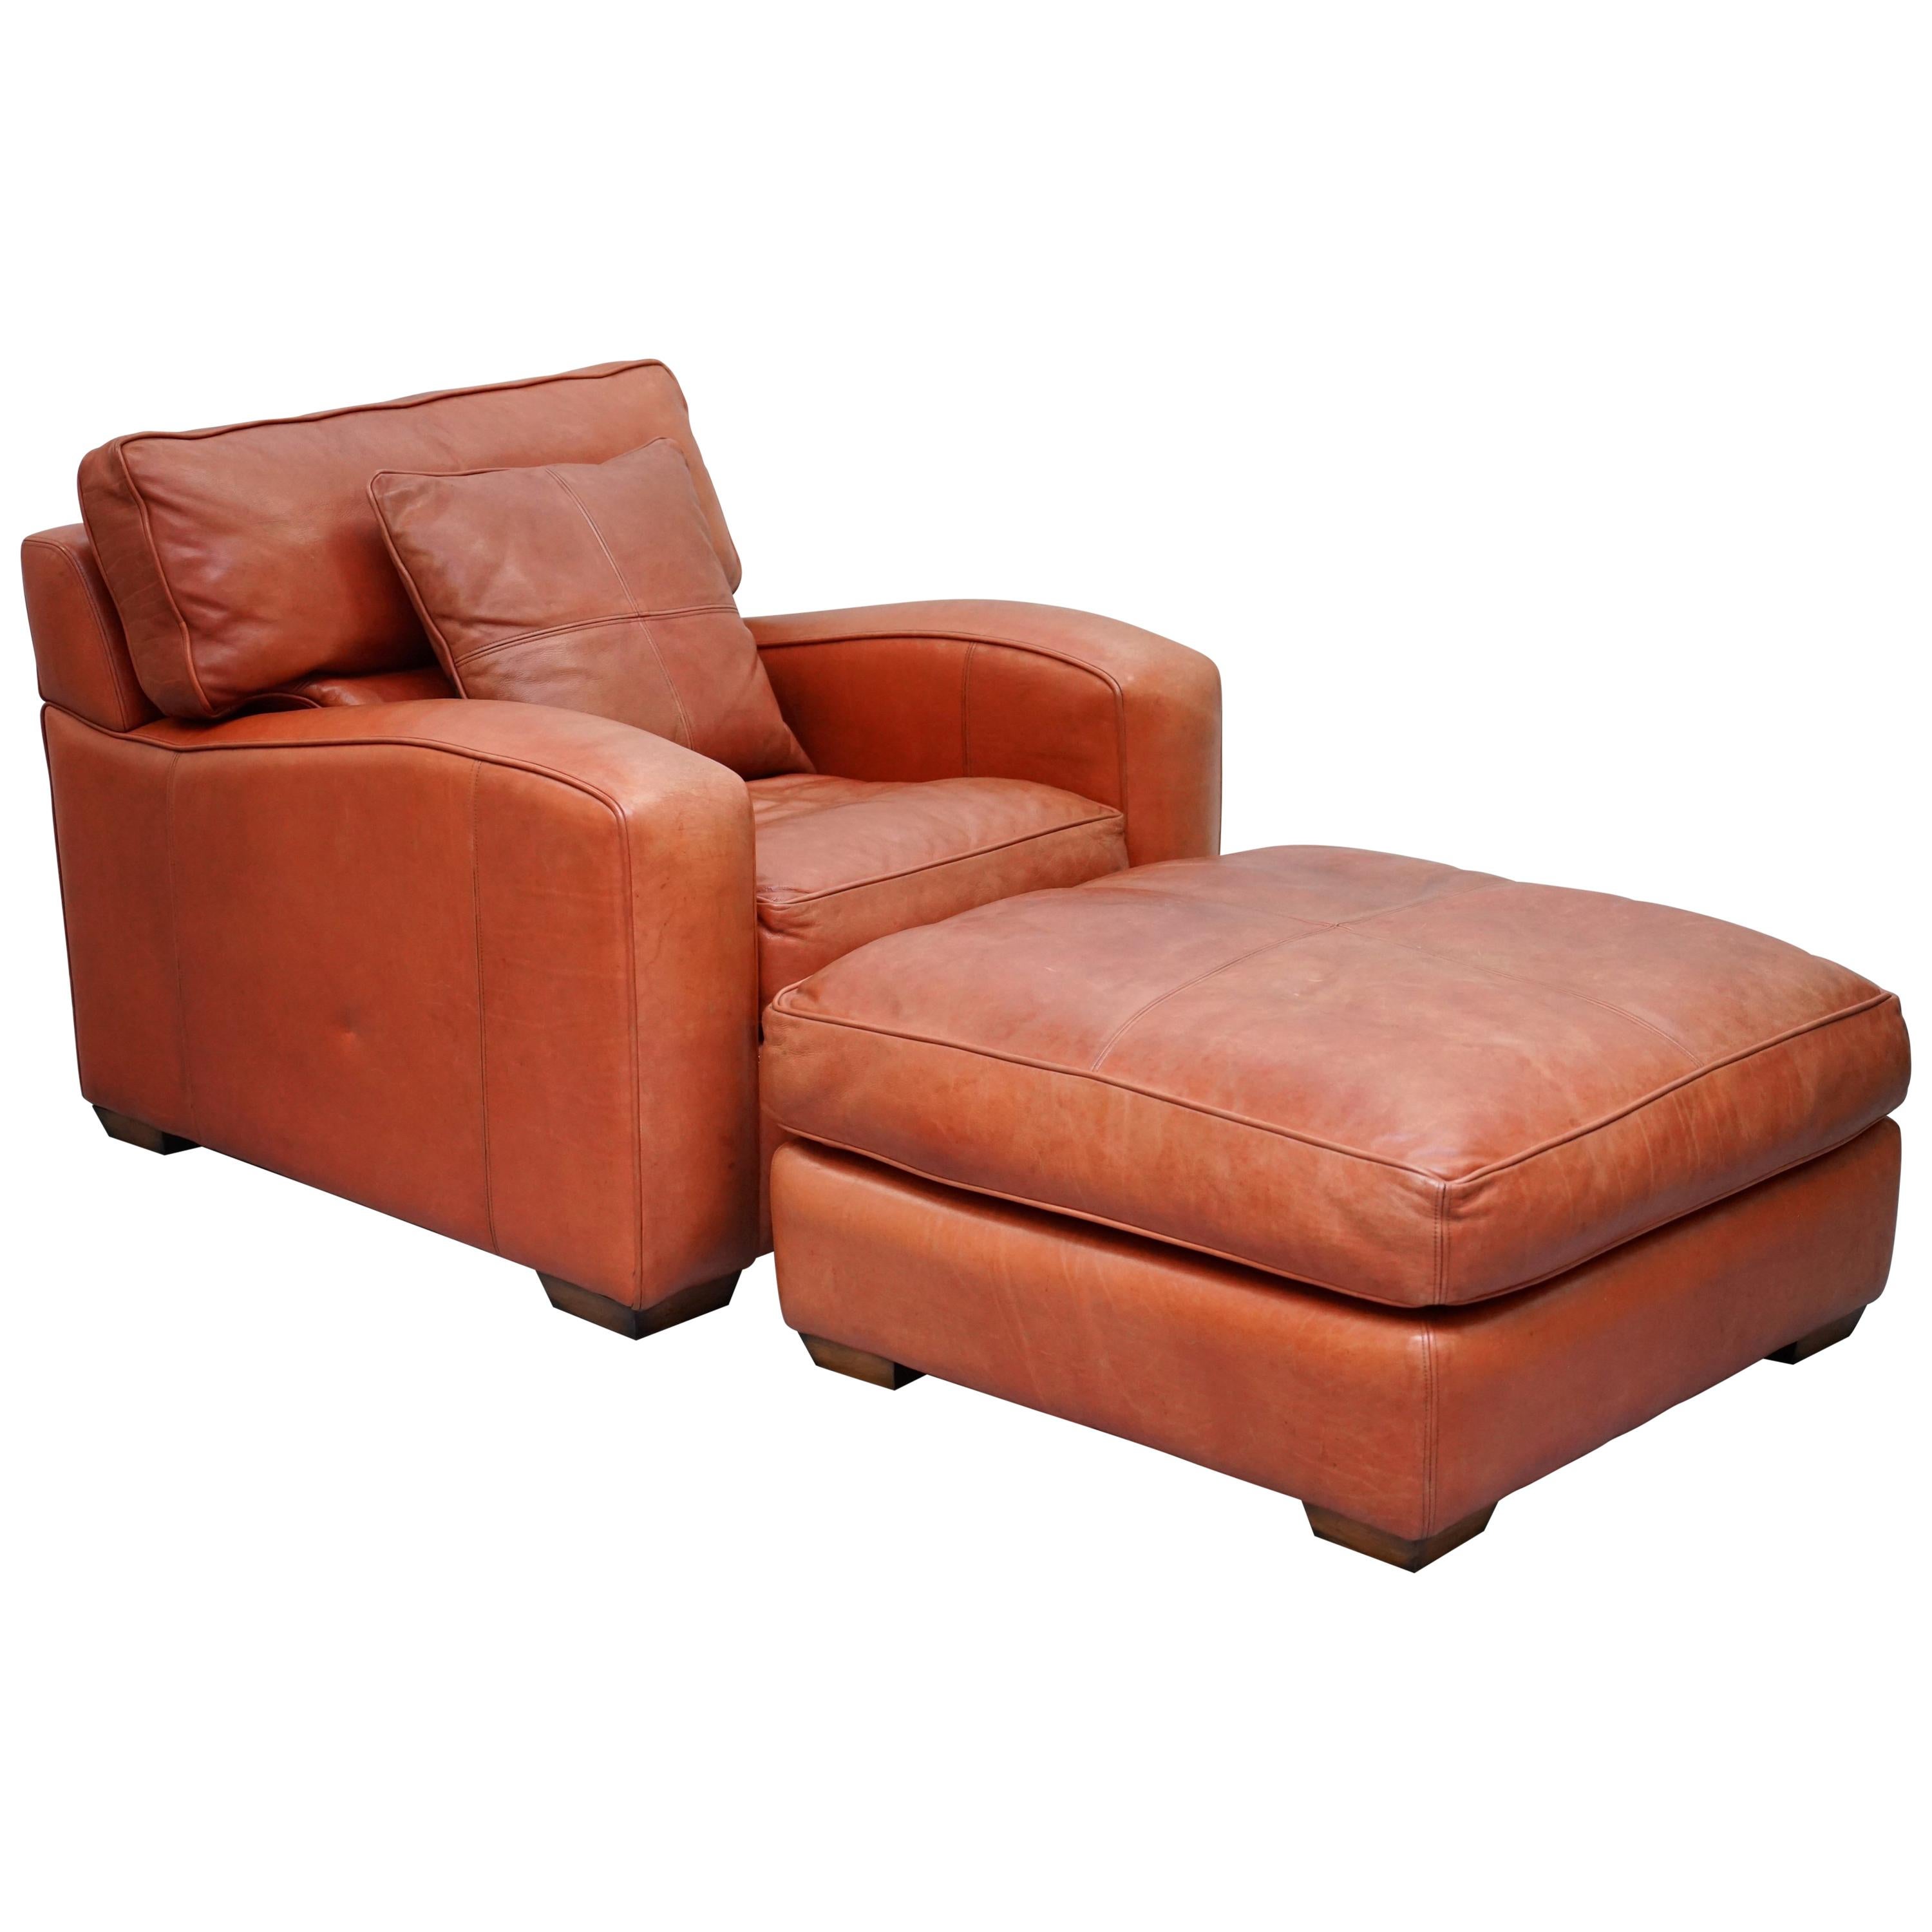 Duresta Panther Brown Leather Armchair and Oversized Plantation Stool